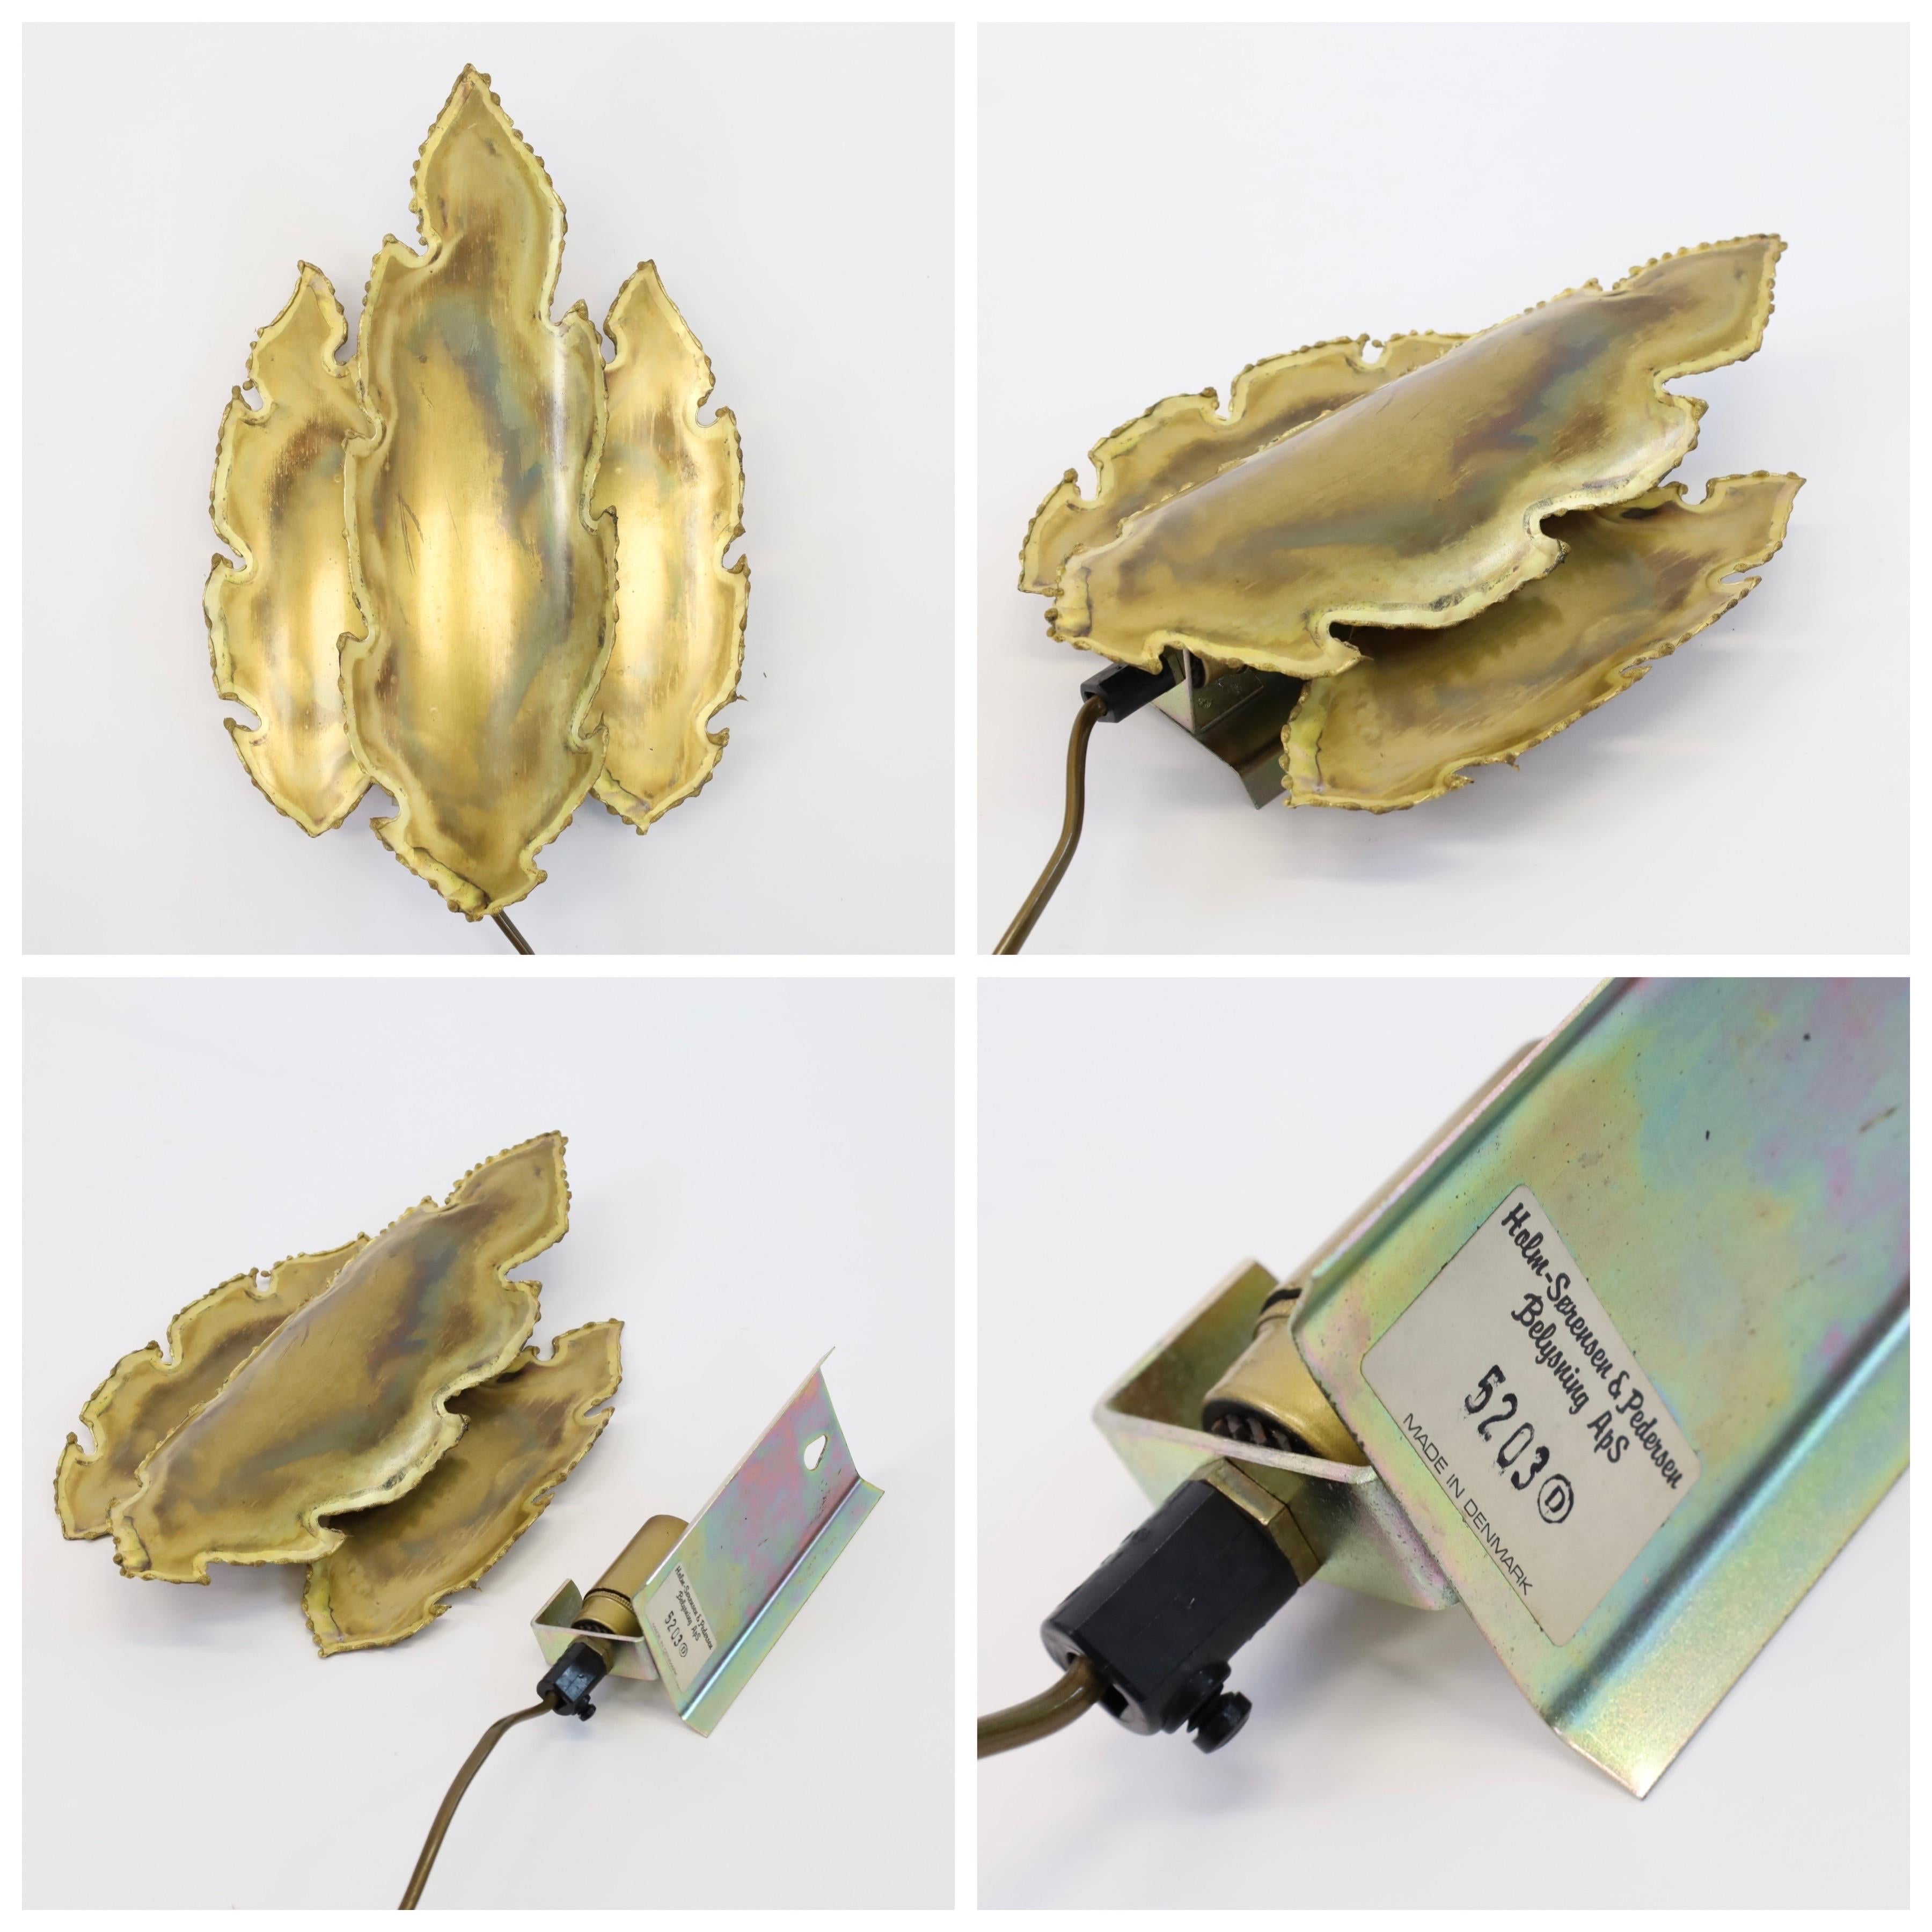 Pair of Leaf-Shaped Brass Wall Lamps by Svend Aage Holm Sorensen, 1960s, Denmark For Sale 1